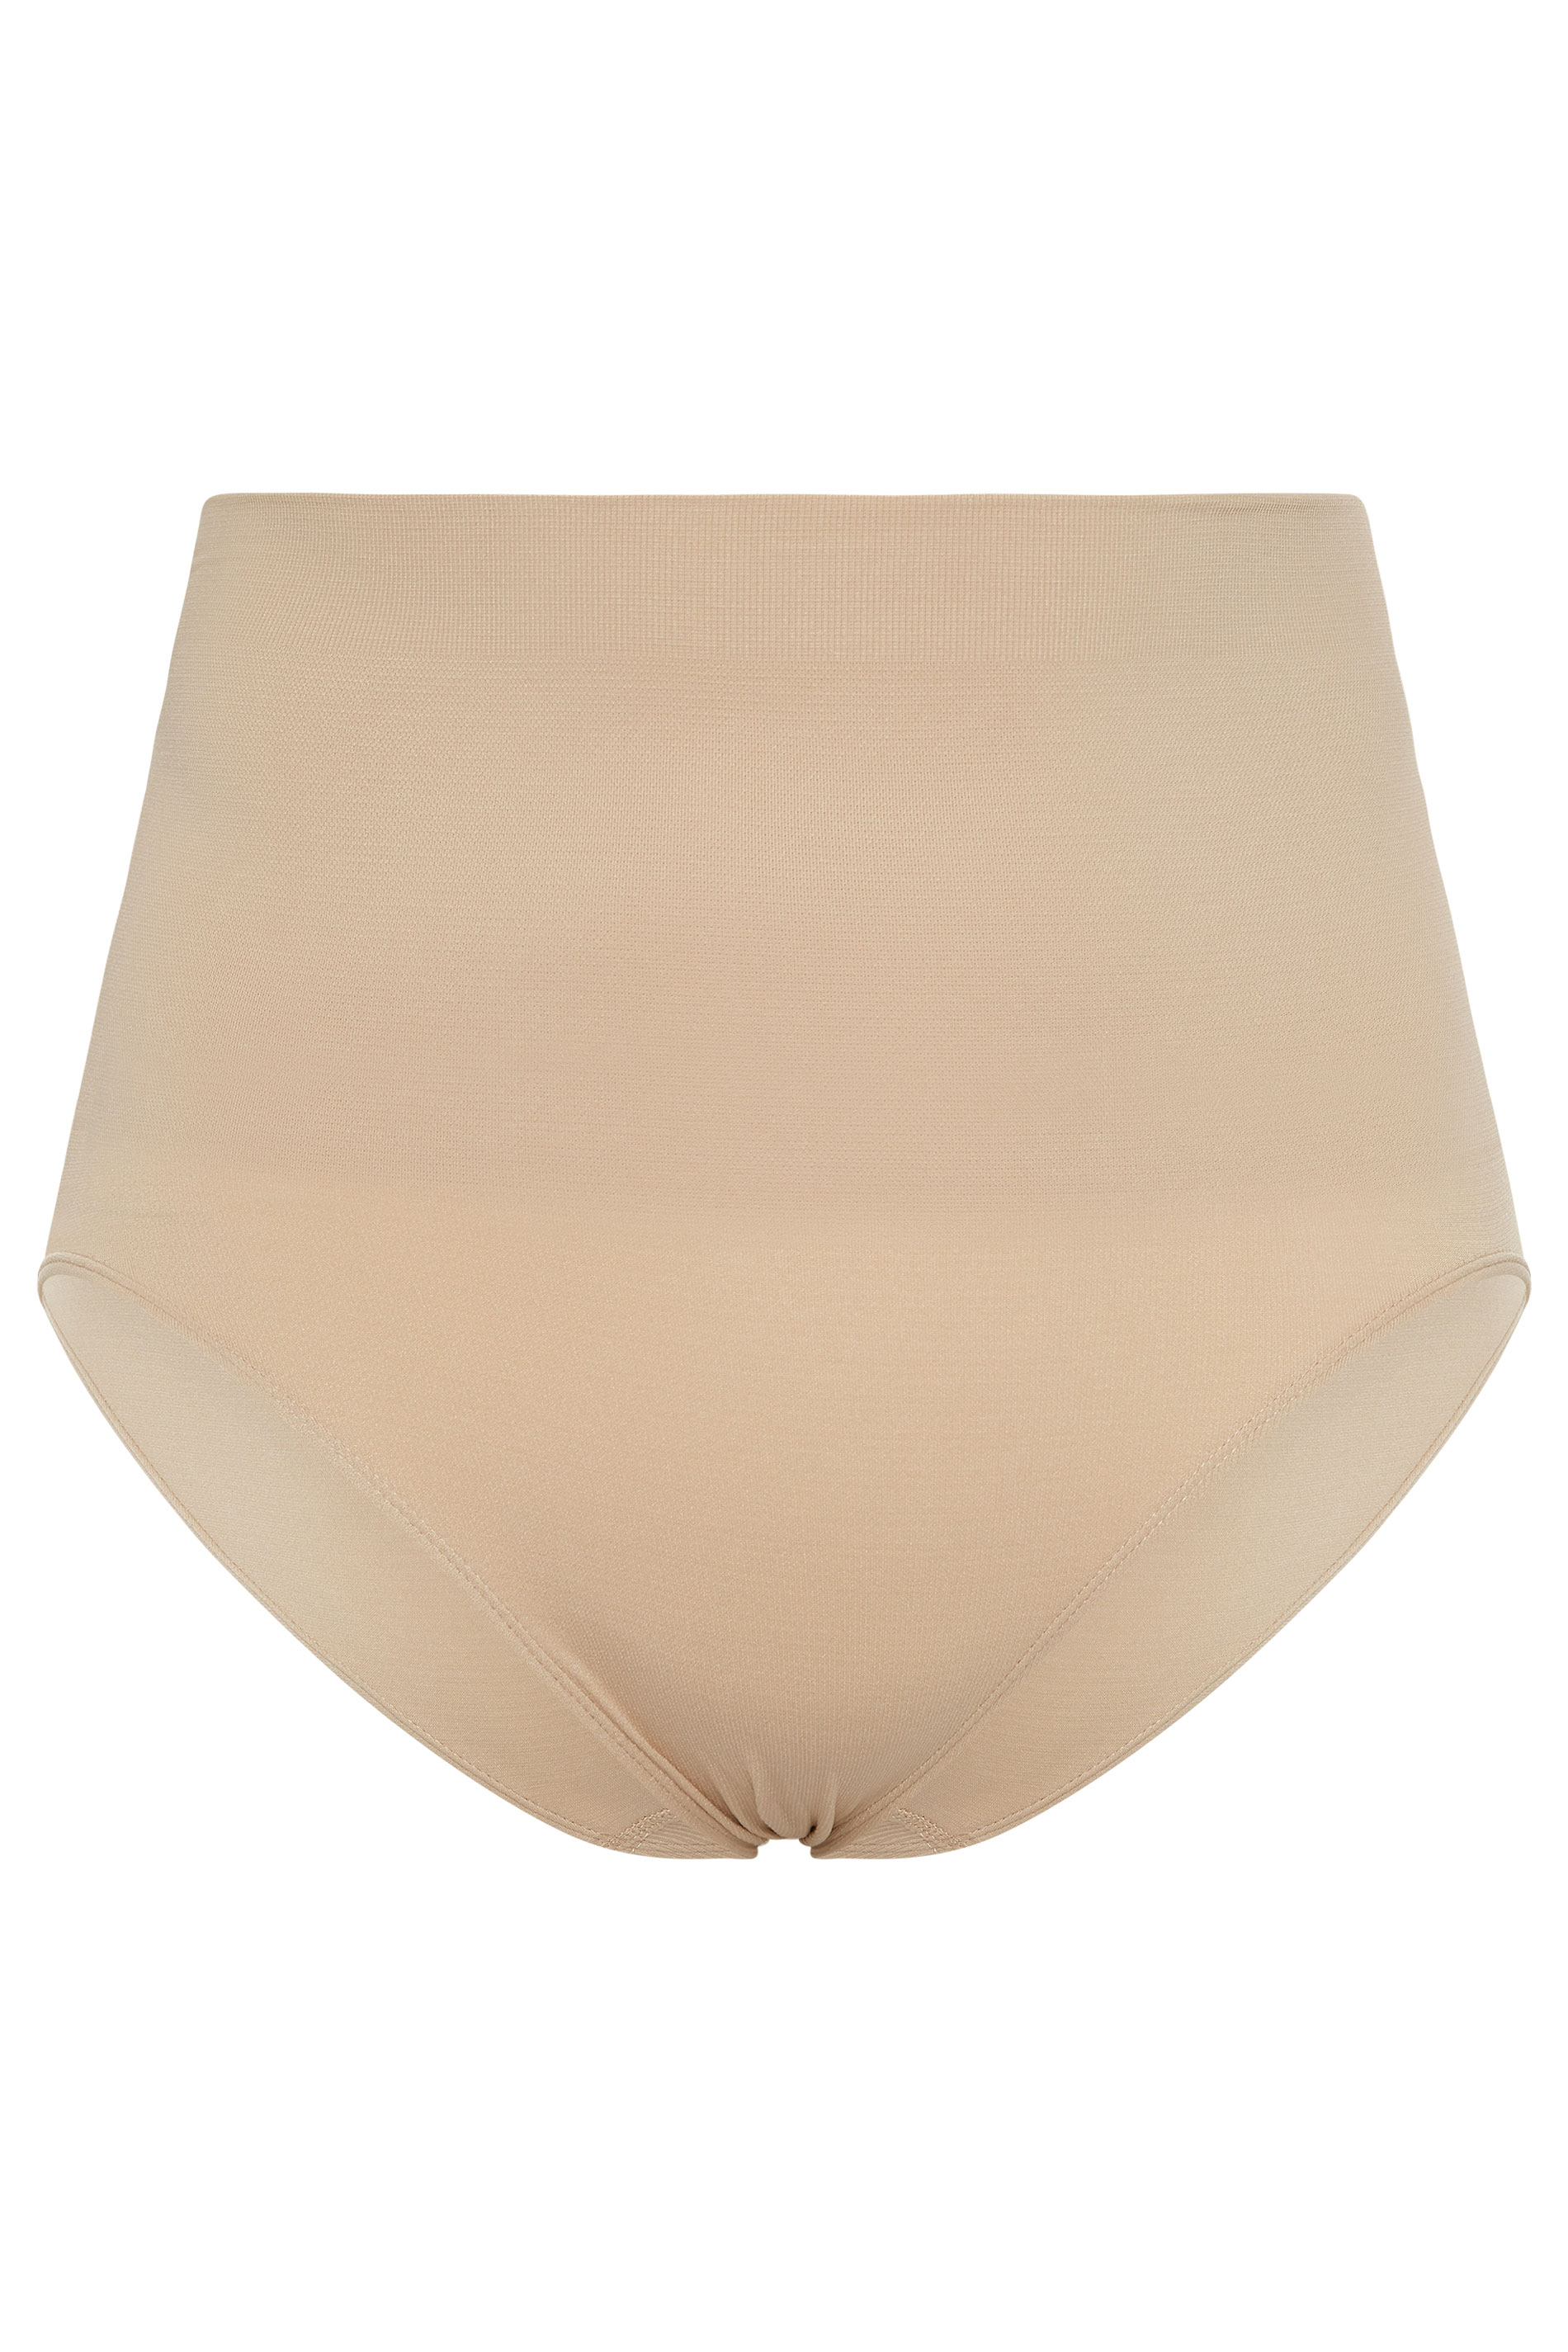 Plus Size Nude Seamless Control High Waisted Shorts